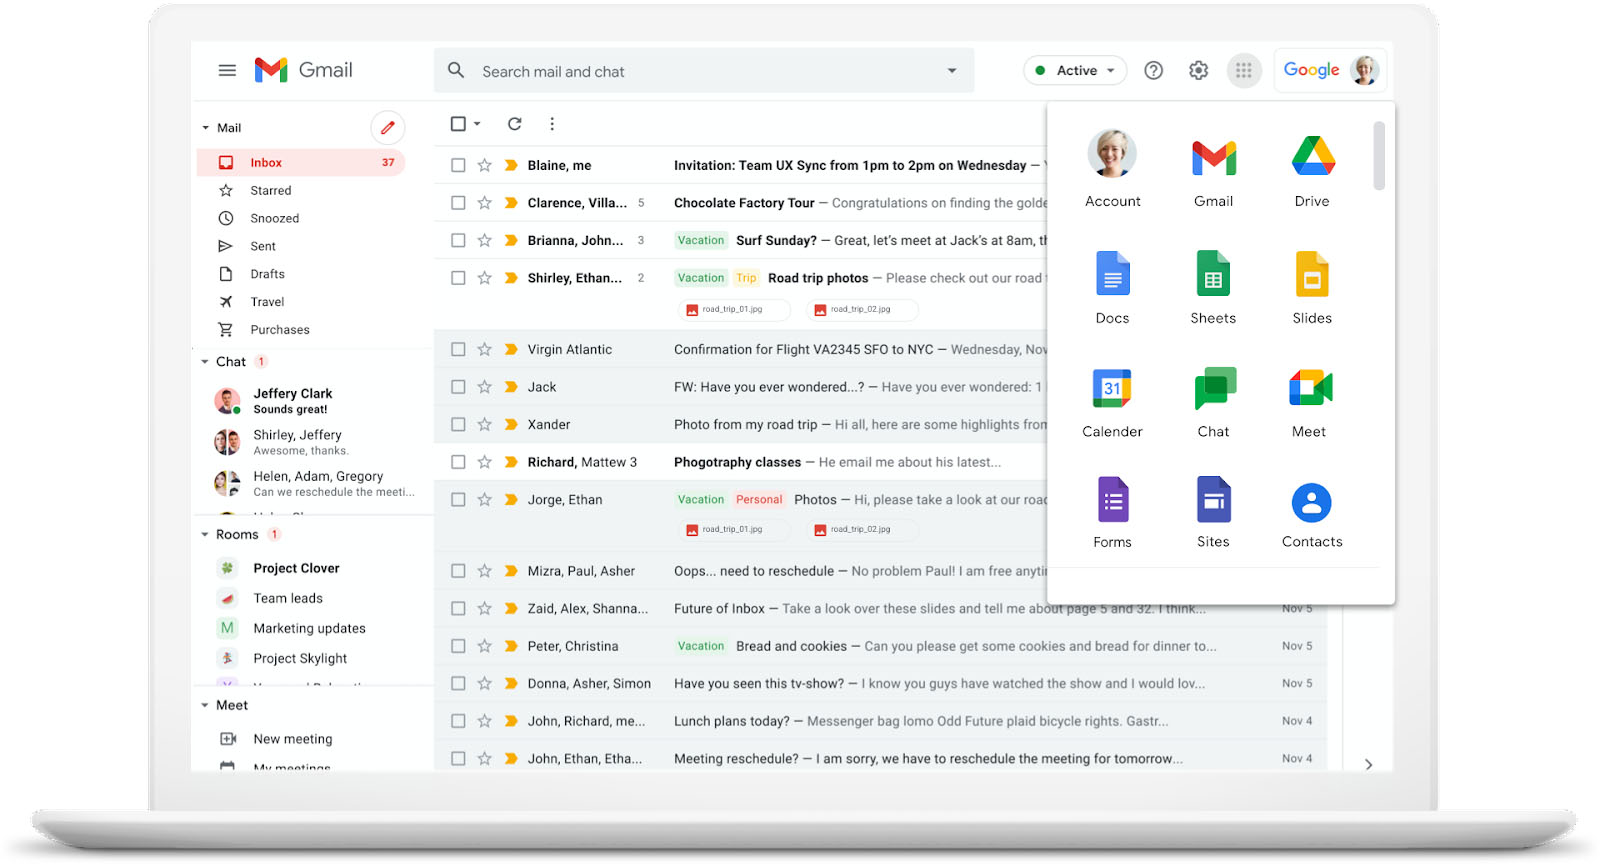 Sample interface of Google Workspace apps, specifically Gmail.